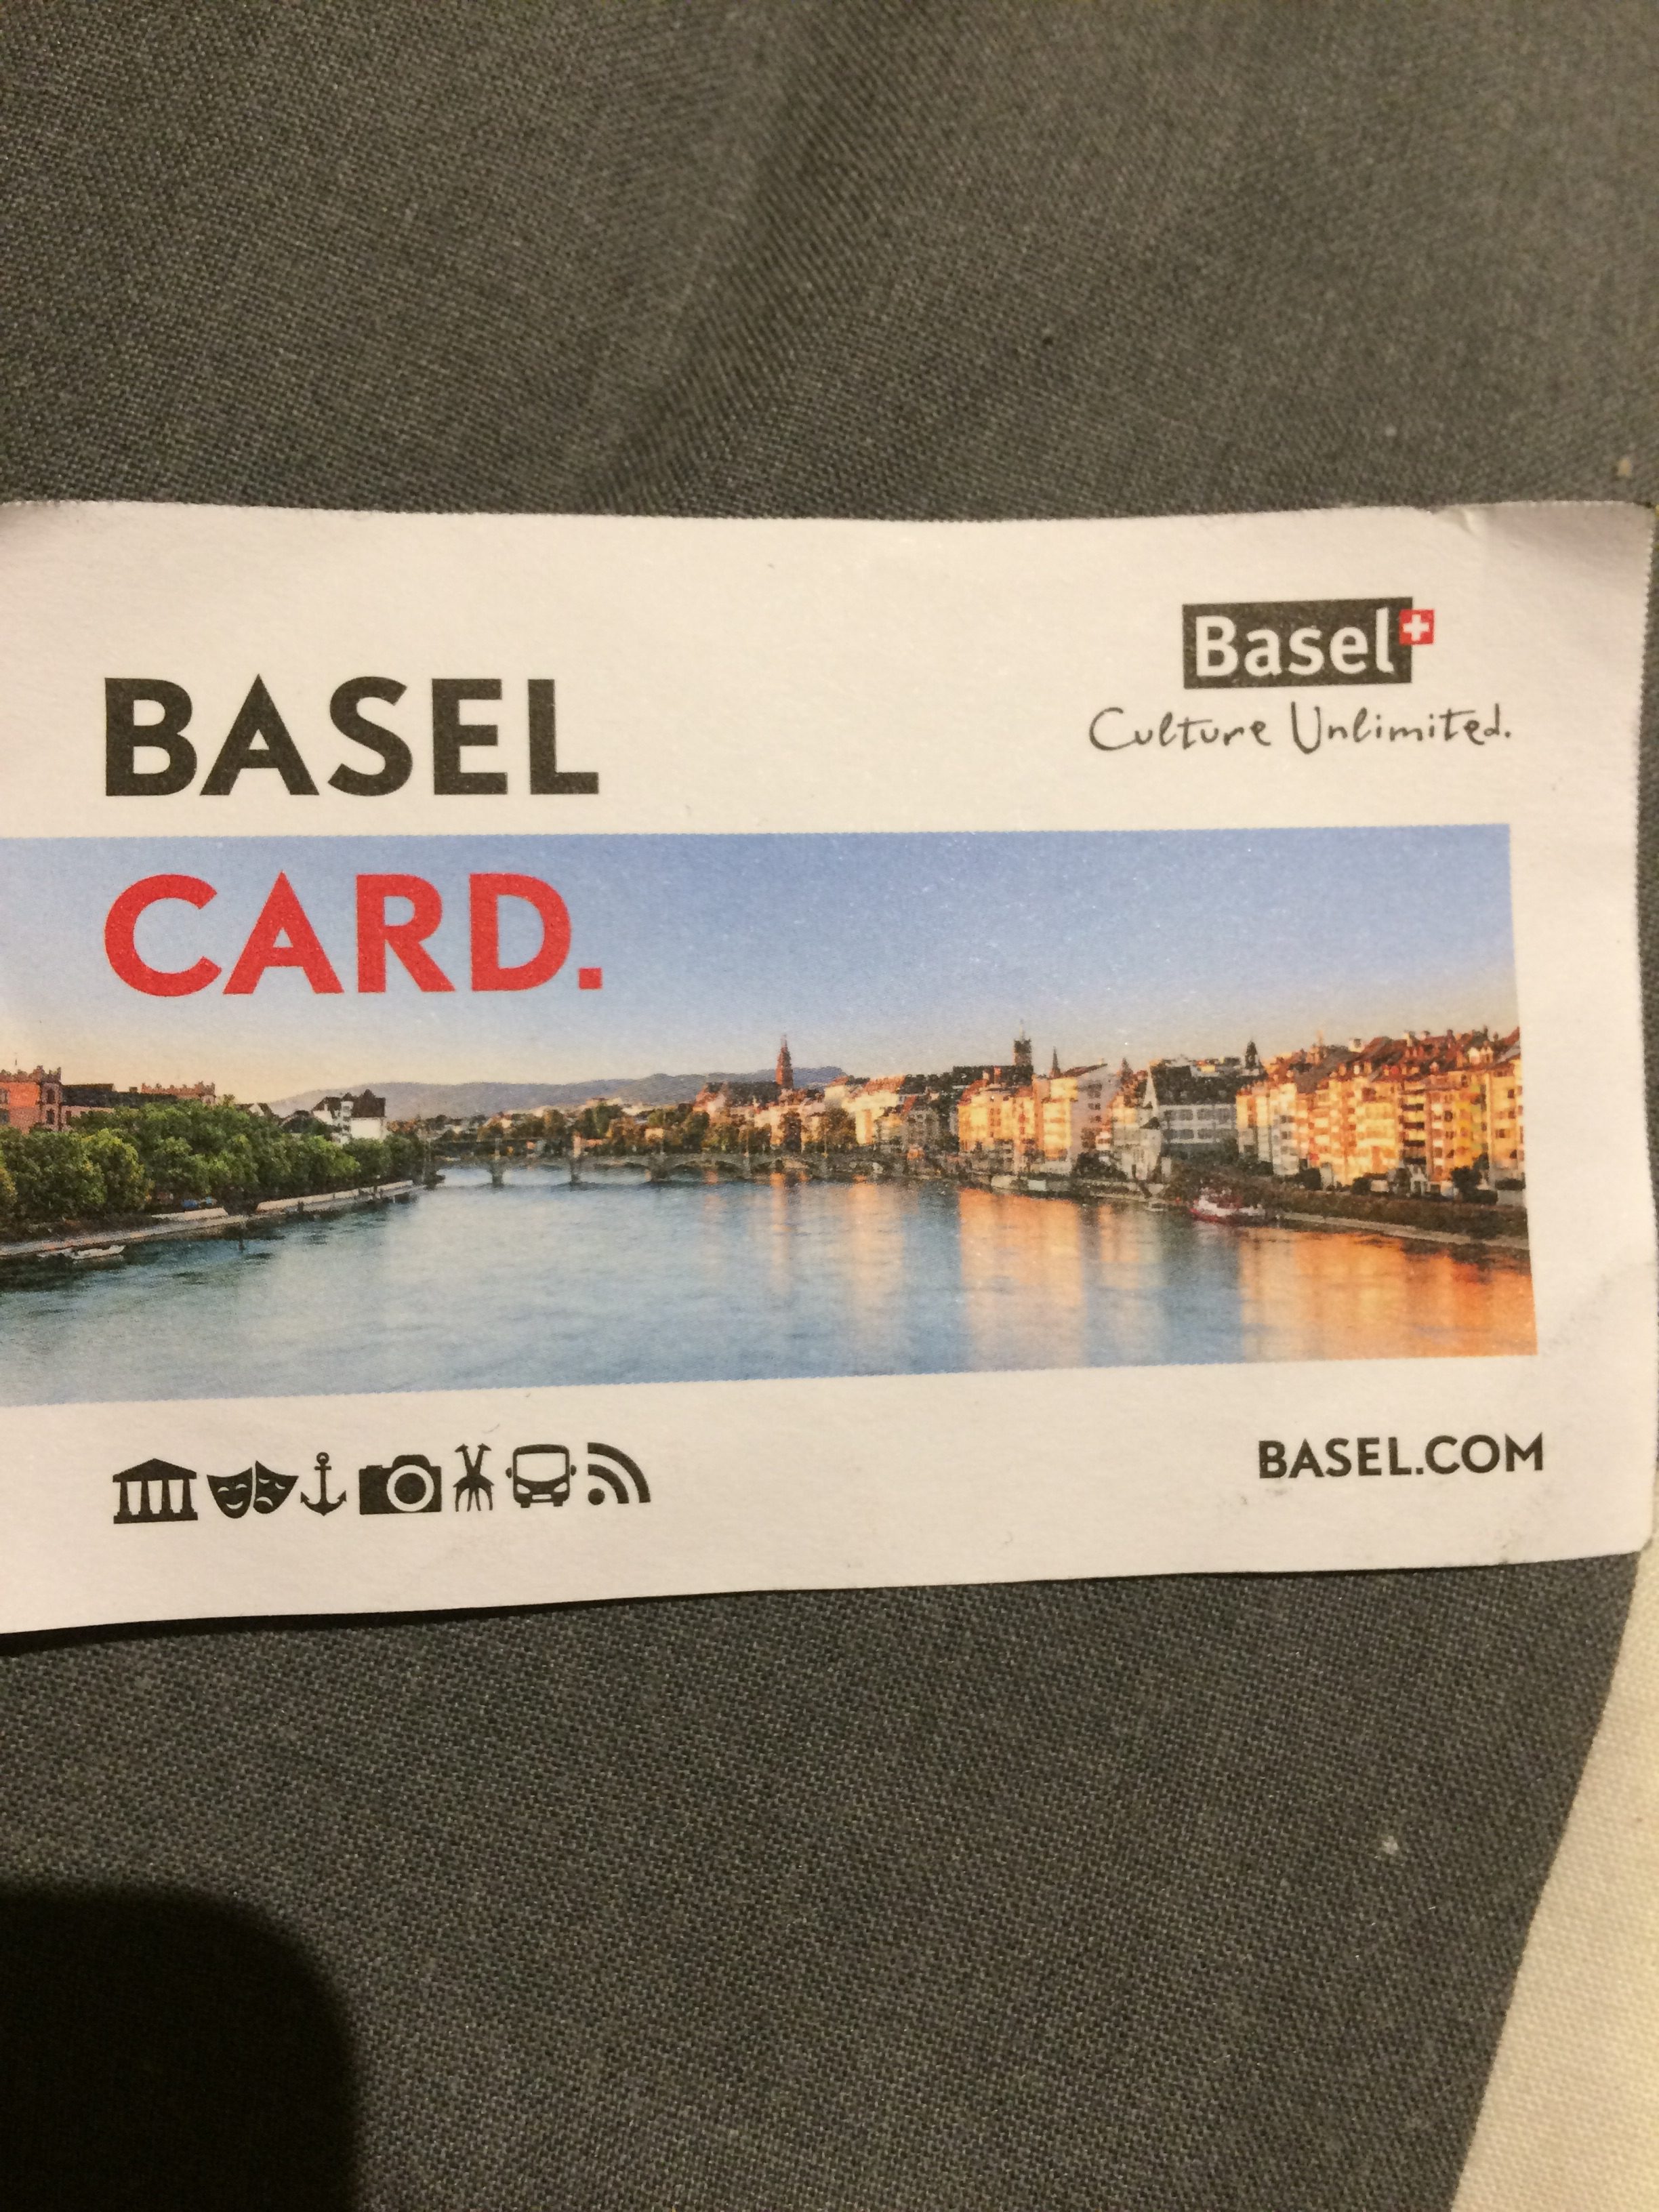 Basel Switzerland on a budget. The Basel City Card